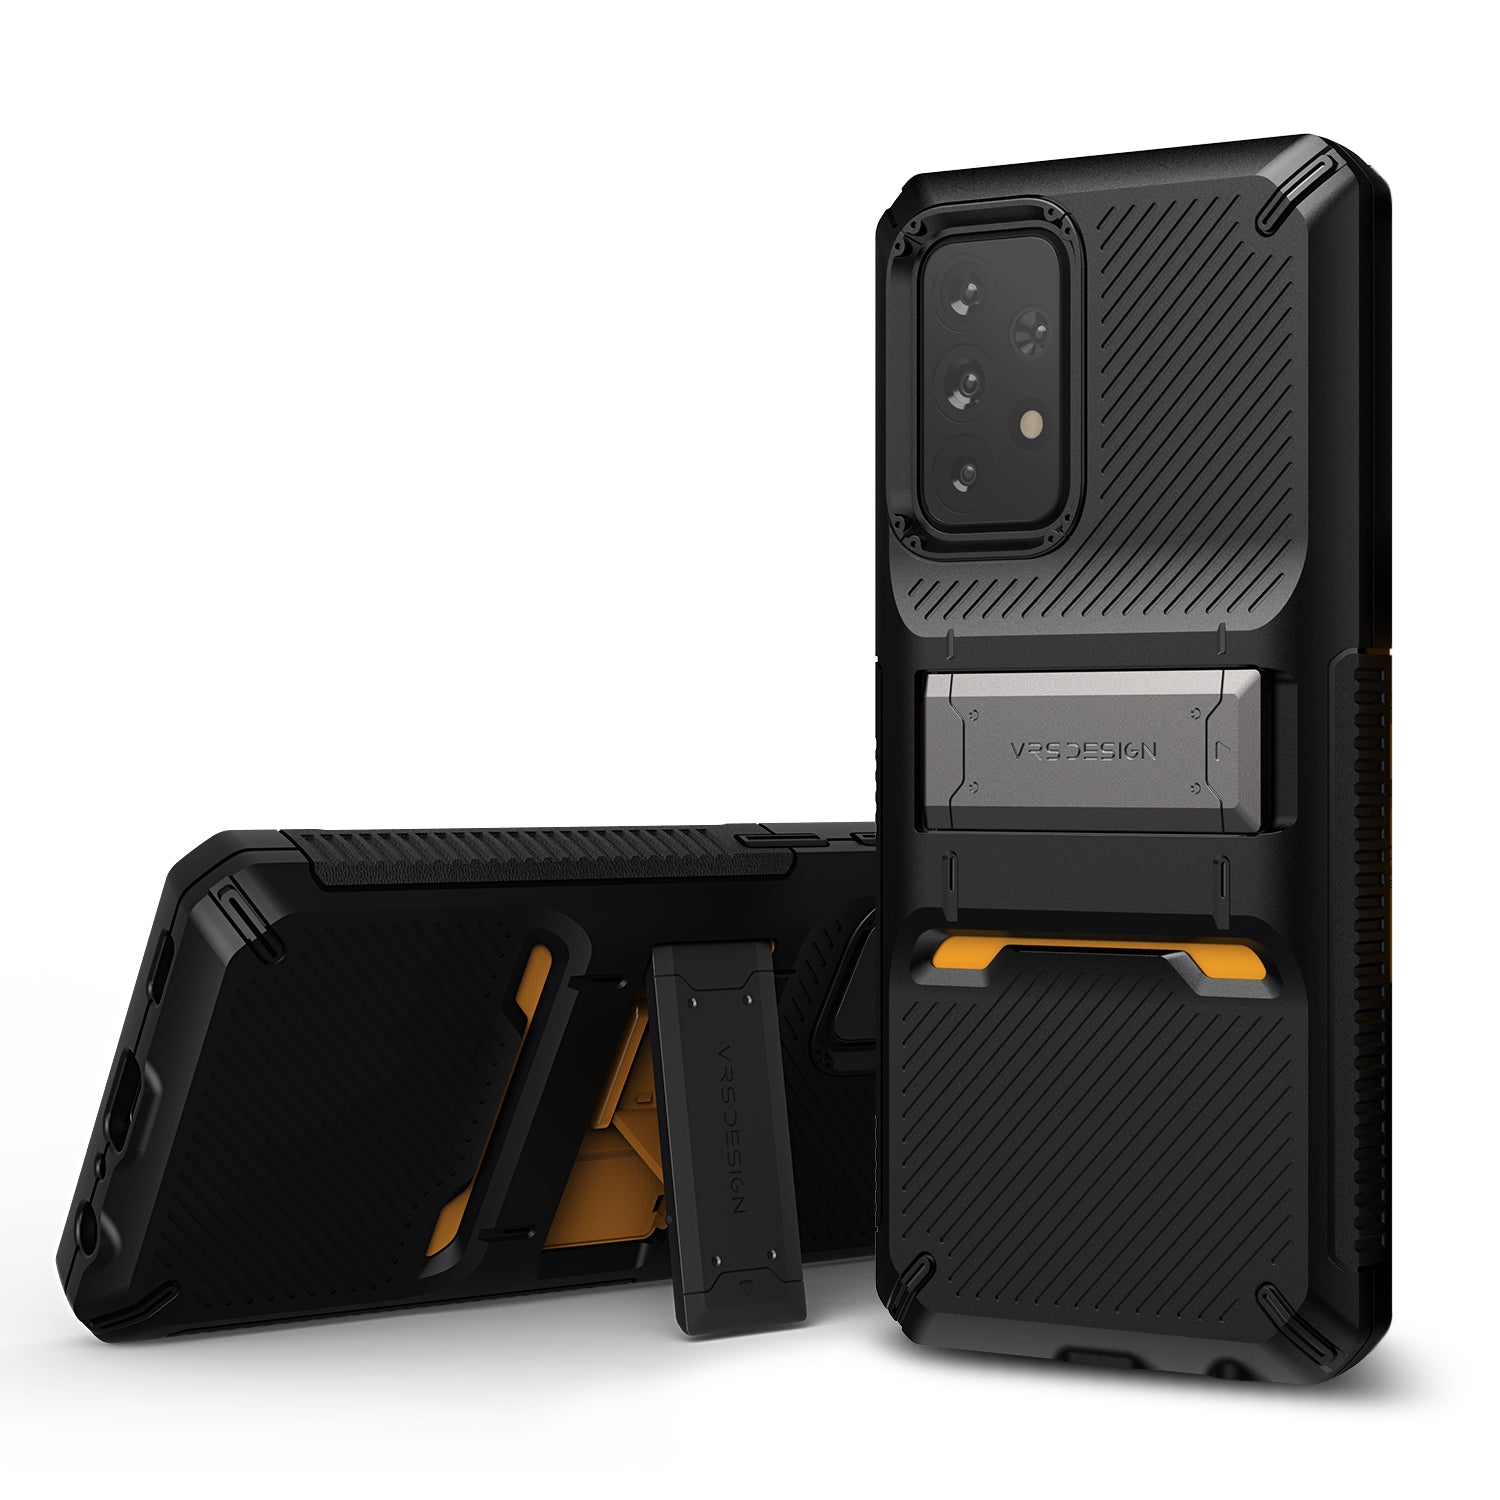 Samsung Galaxy A52 rugged slim case with multiple durable and convenient sleek minimalist look and durability by VRS